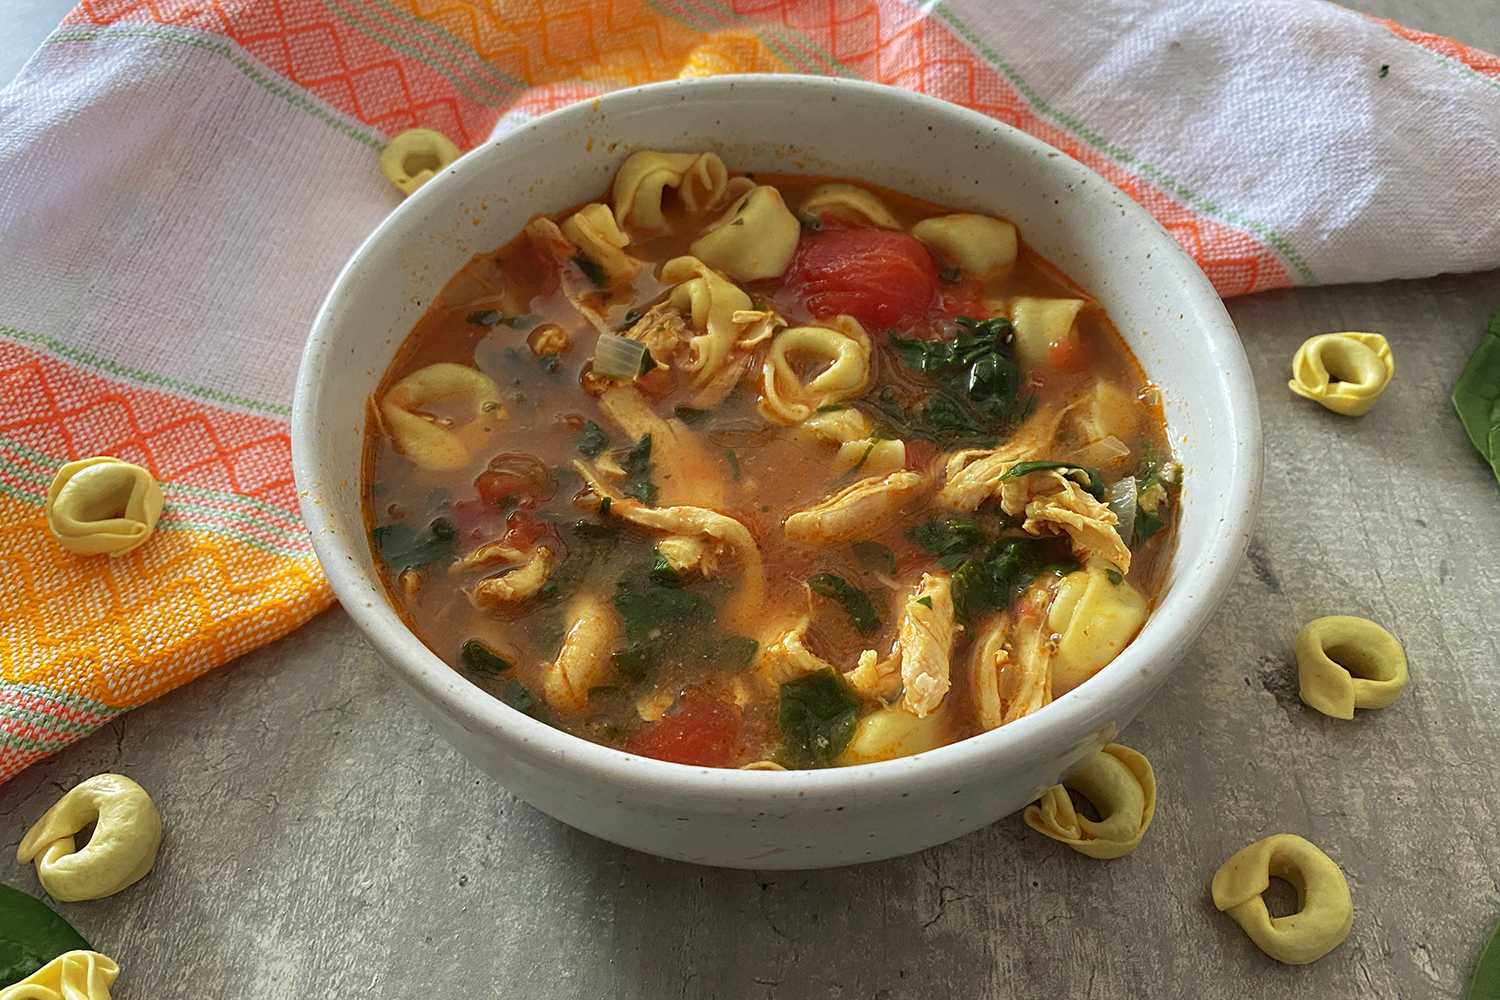 Red soup filled with tortellini noodles, chicken chunks, tomato cubes and parsley